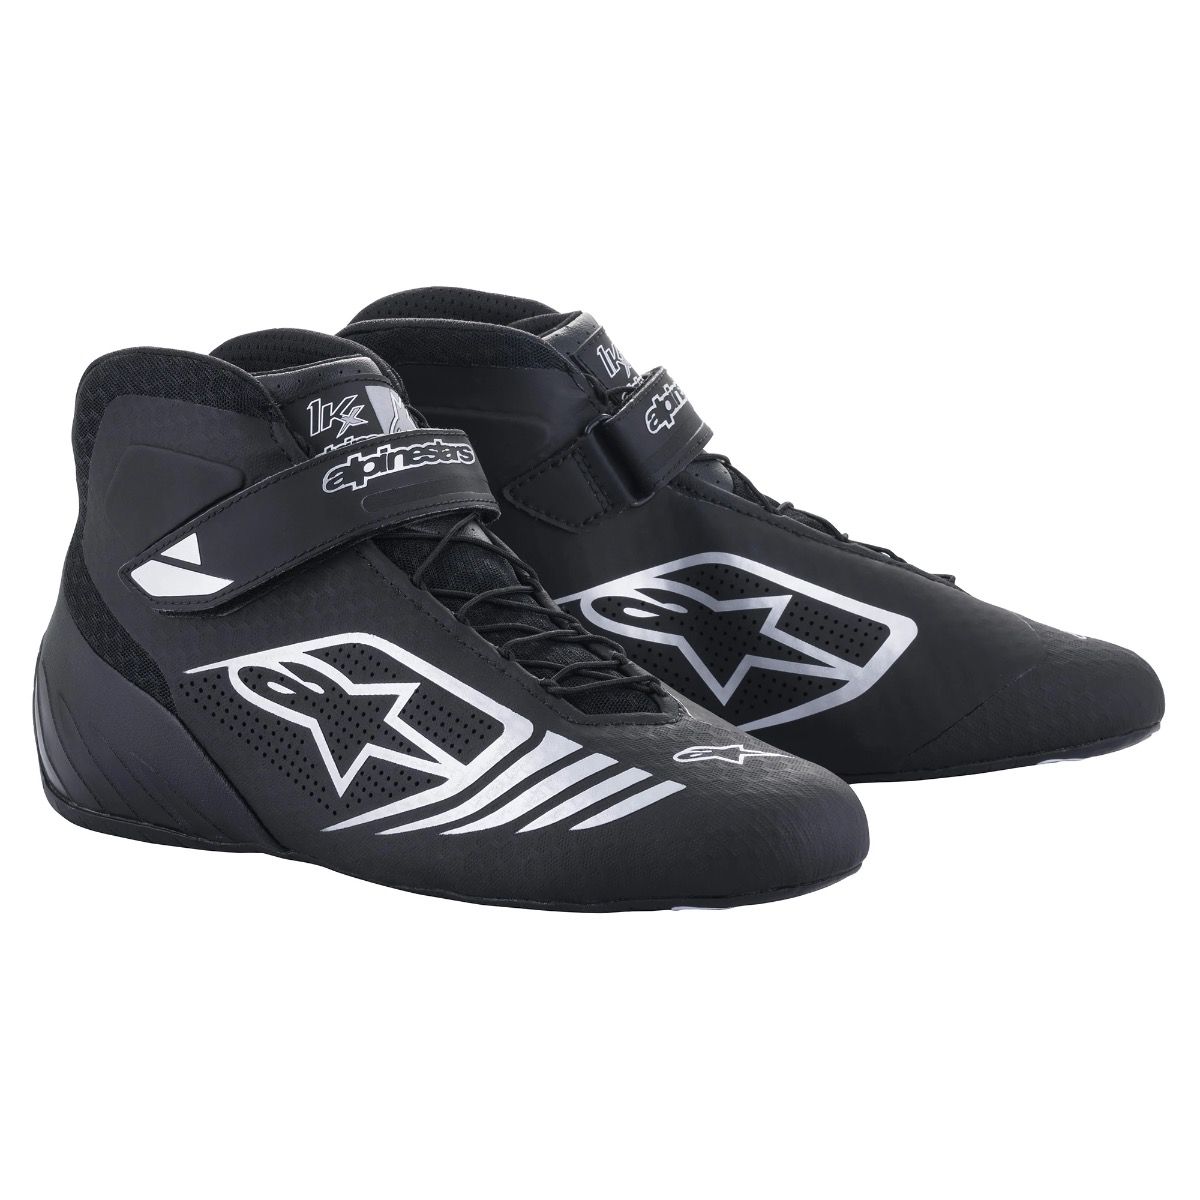 Alpinestars Tech-1 KX YOUTH Karting Shoes - Competition Motorsport